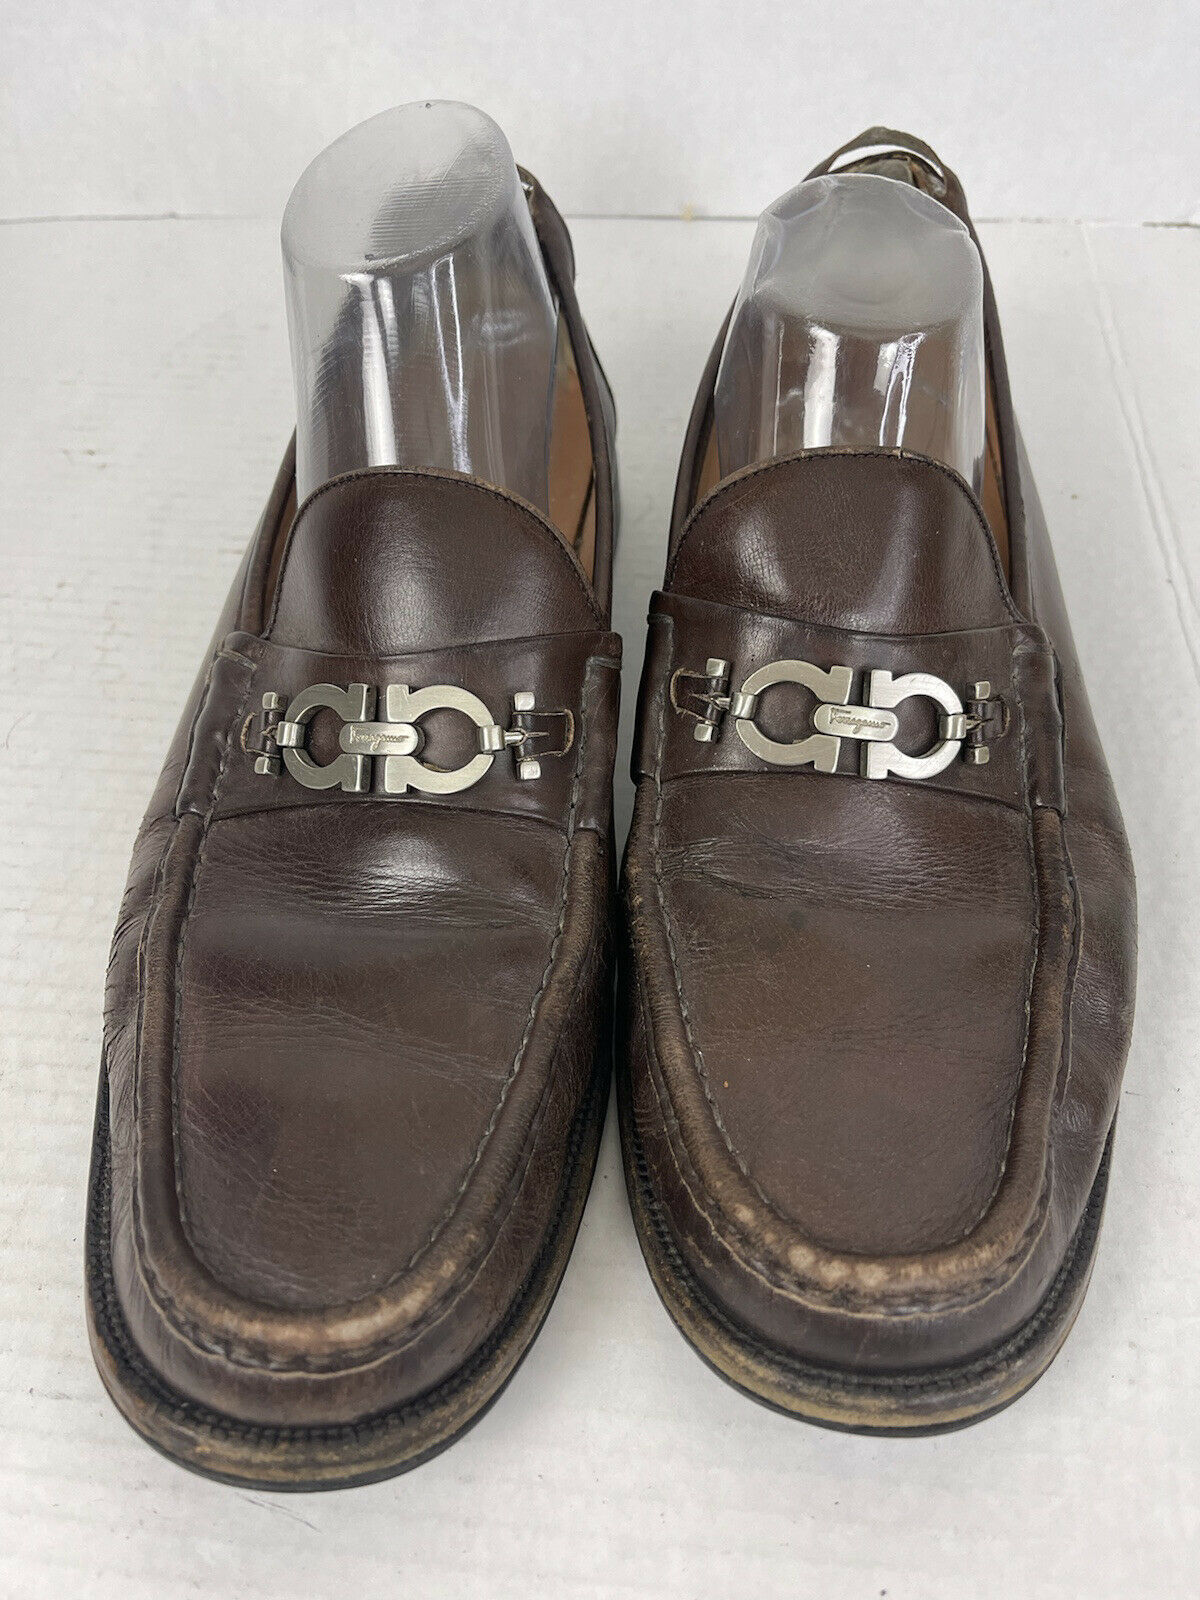 SALVATORE FERRAGAMO BROWN LEATHER LUG SOLE LOAFER DRESS SHOES 12 D NEEDS REPAIR